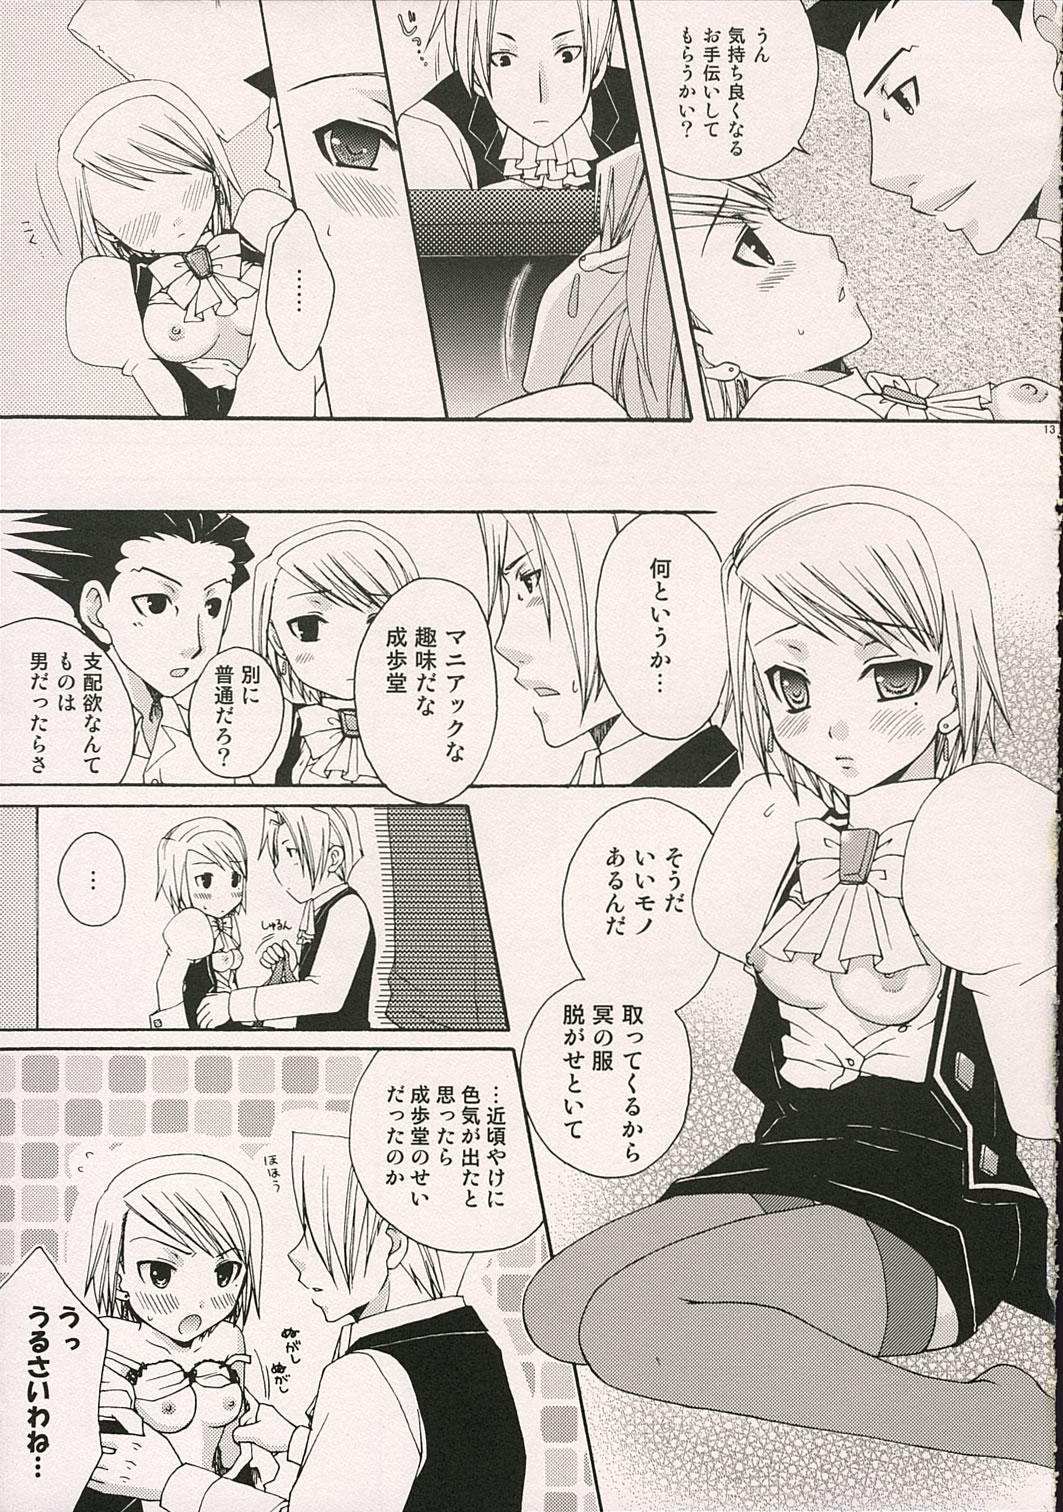 Gag Aigan Kenji - Ace attorney Online - Page 12